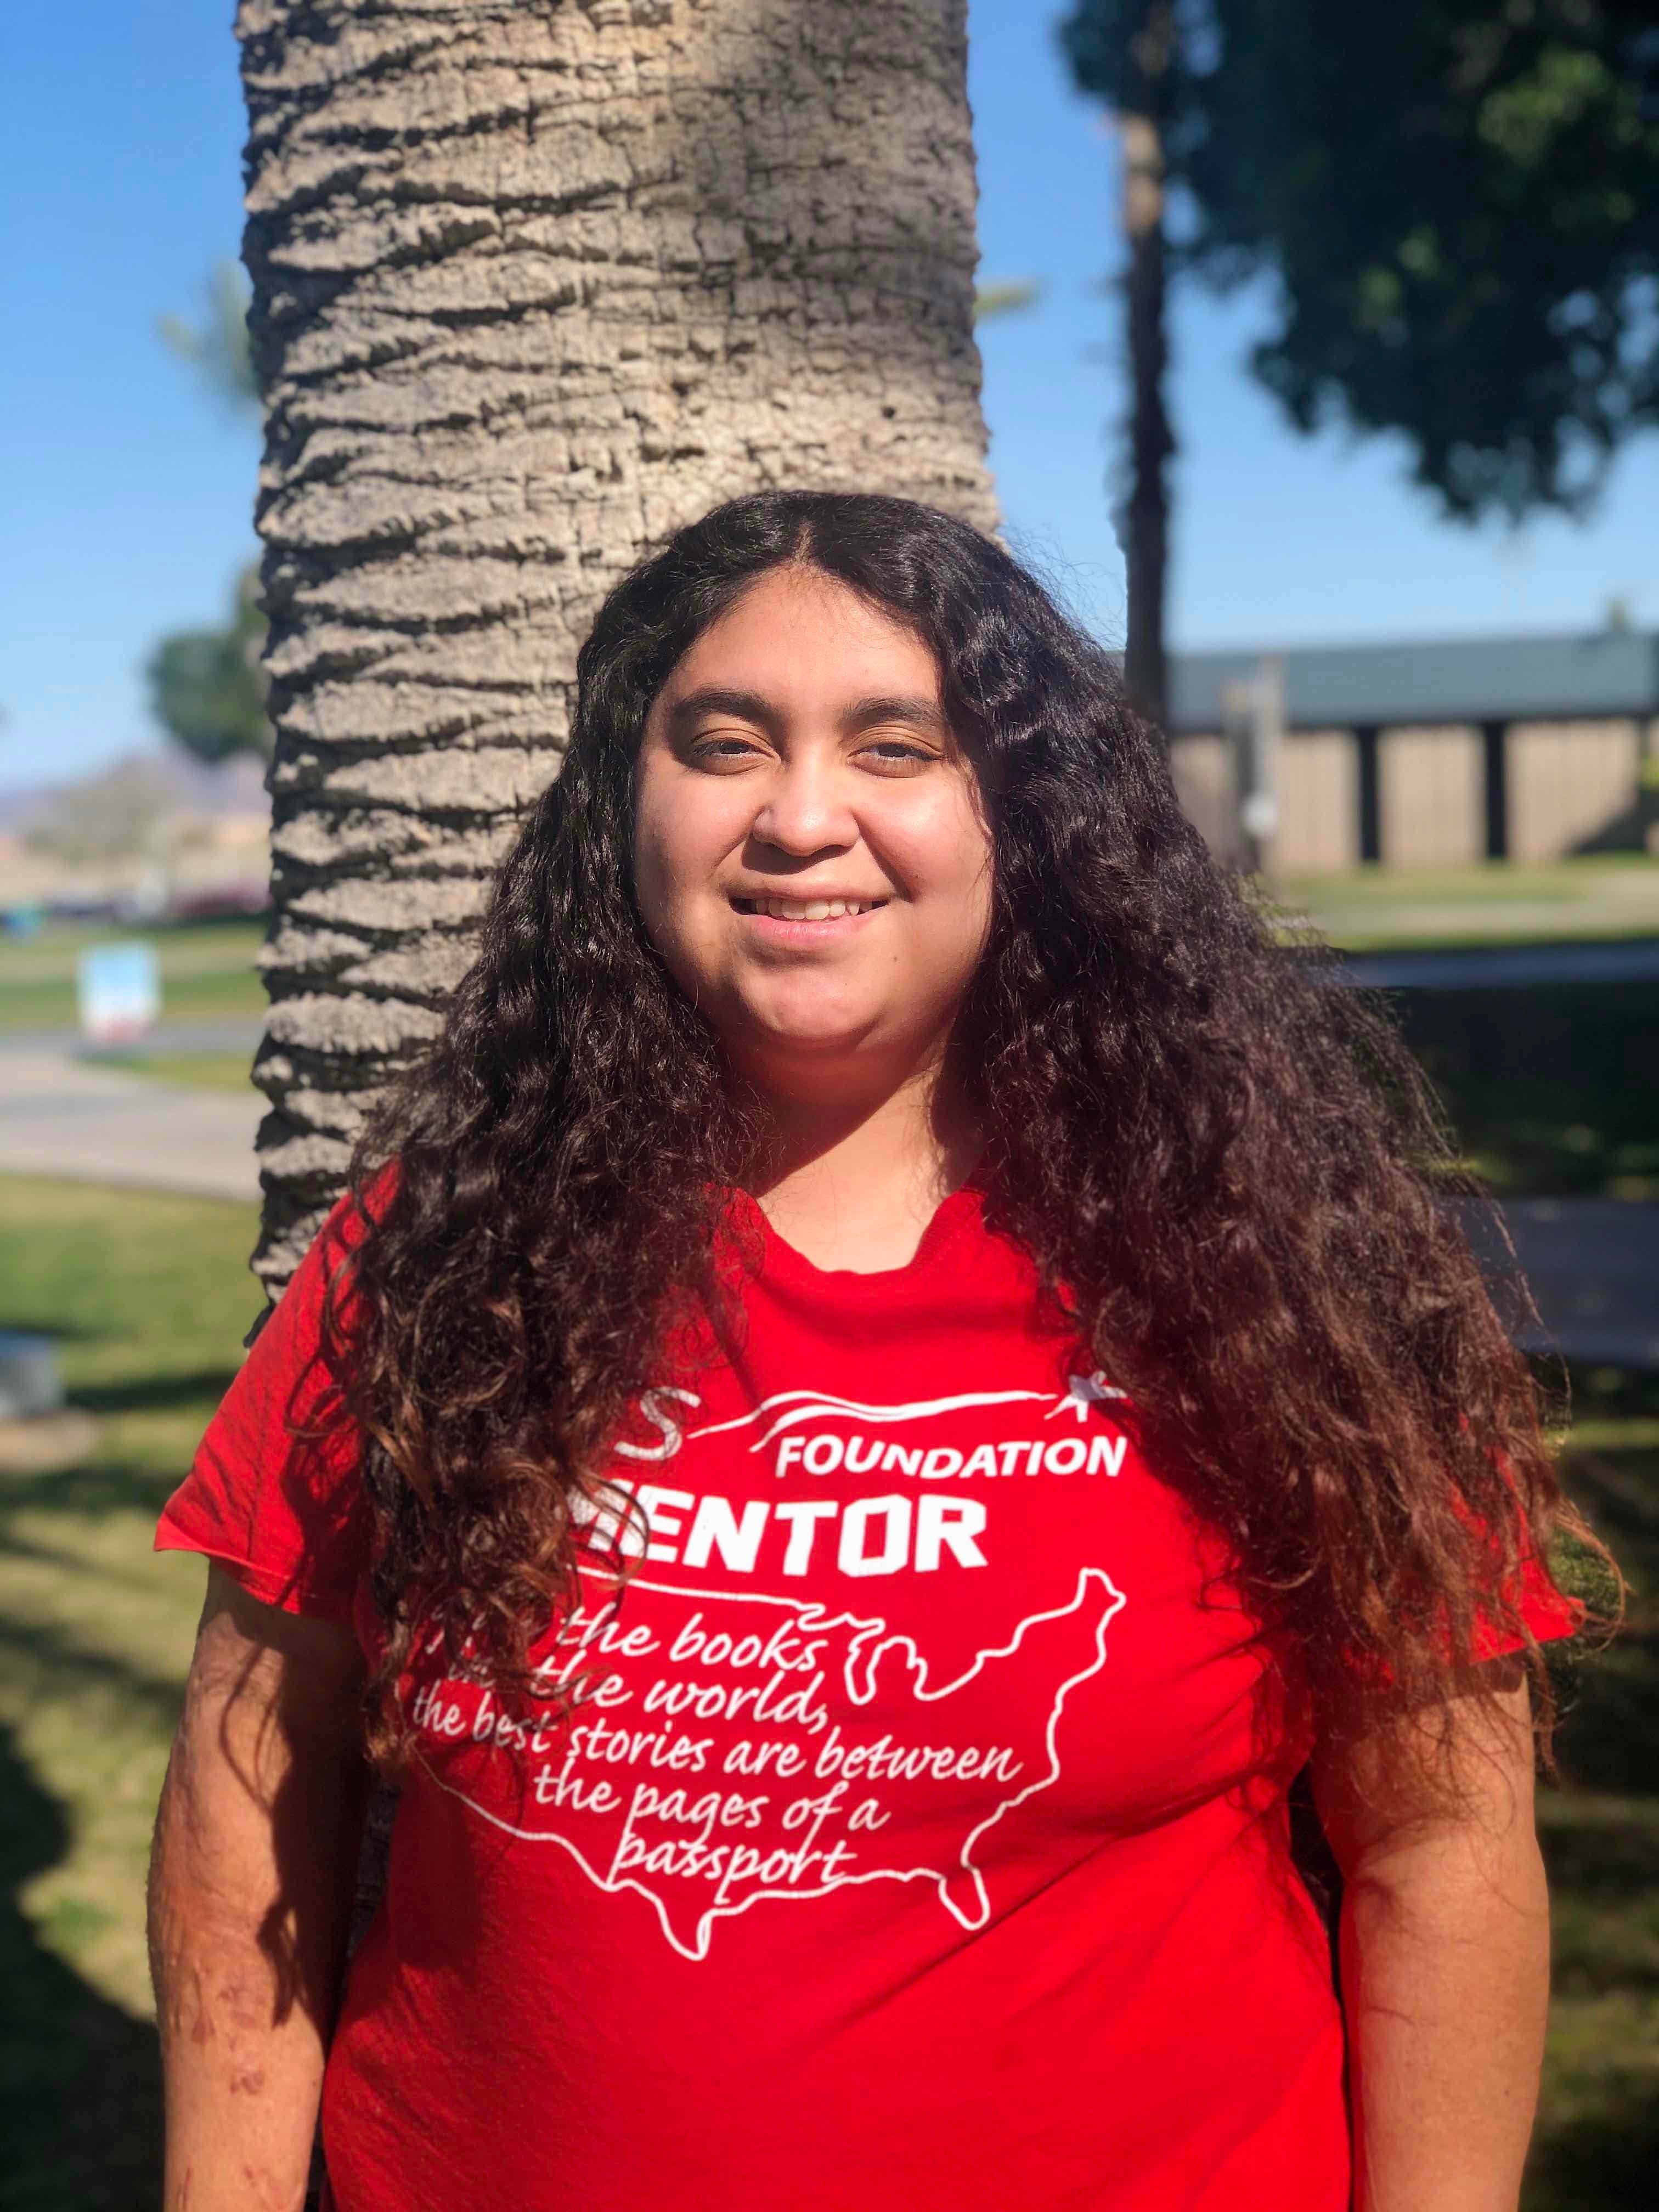 A girl with long black curly hair is wearing a red shirt that says "Foundation Mentor" and is smiling in front of a palm tree.